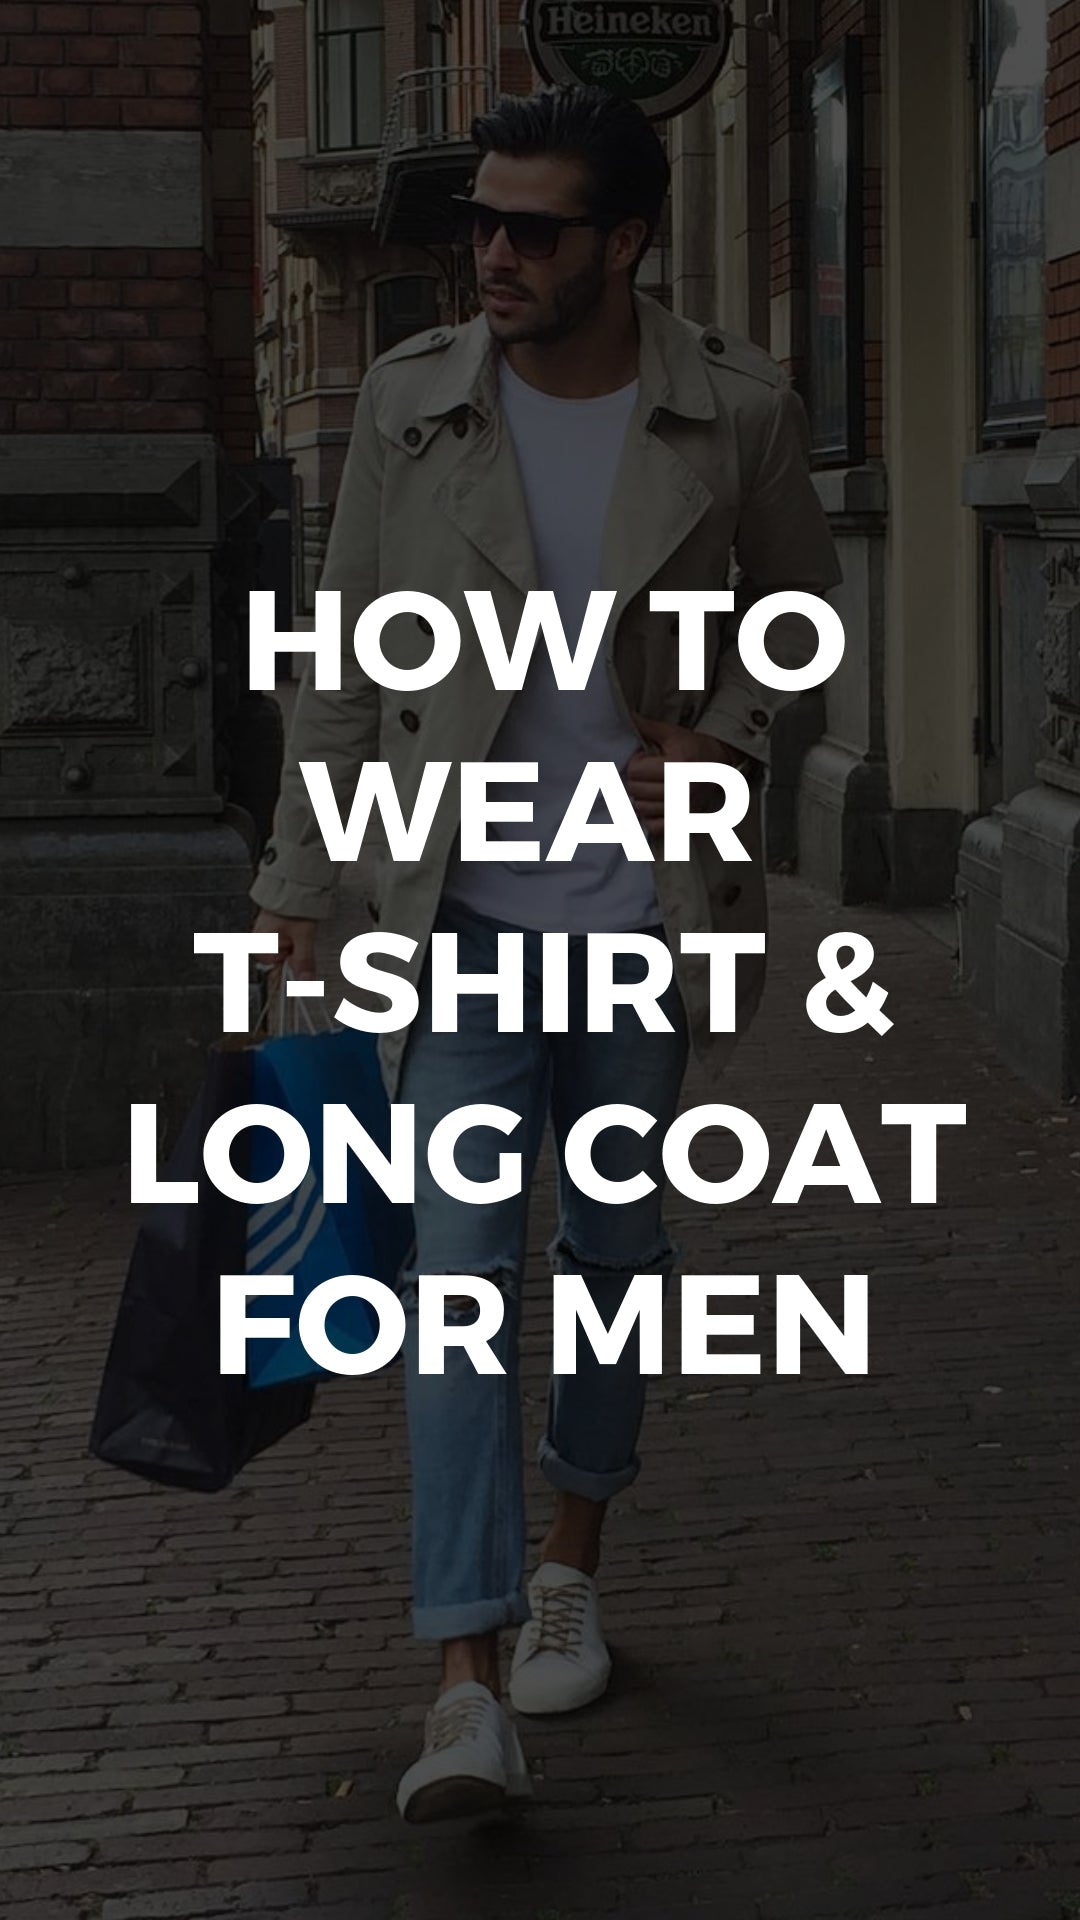 10 Ways To Wear Your Favourite Tee With An Overcoat #tshirt #longcoat #outfits #mensfashion #casual #streetstyle